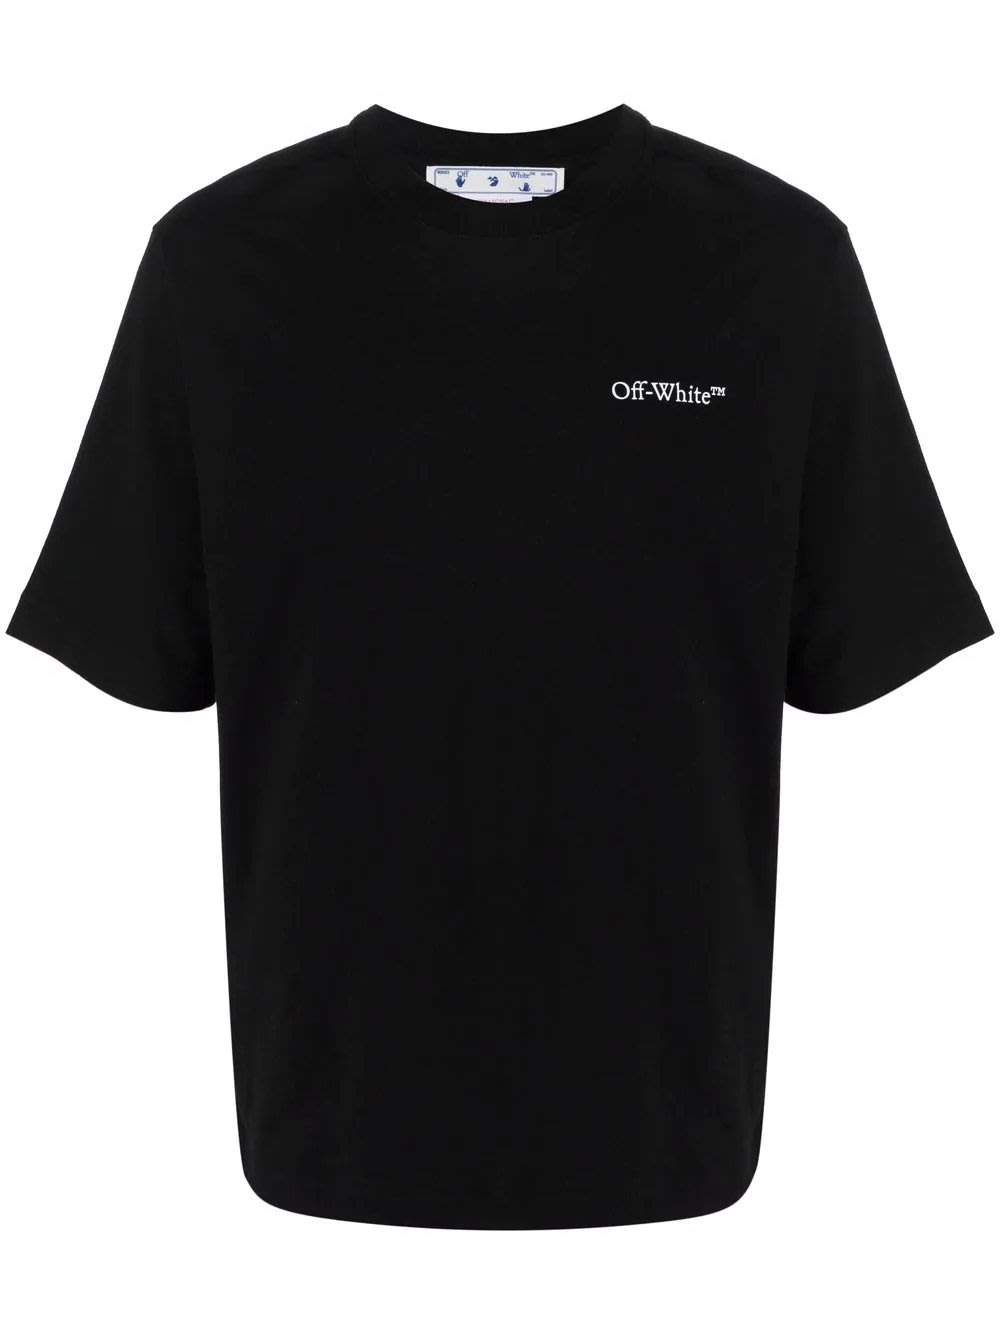 SS Off White Caravaggio Crowning Print Tee 宗教油畫短袖T恤短T OW